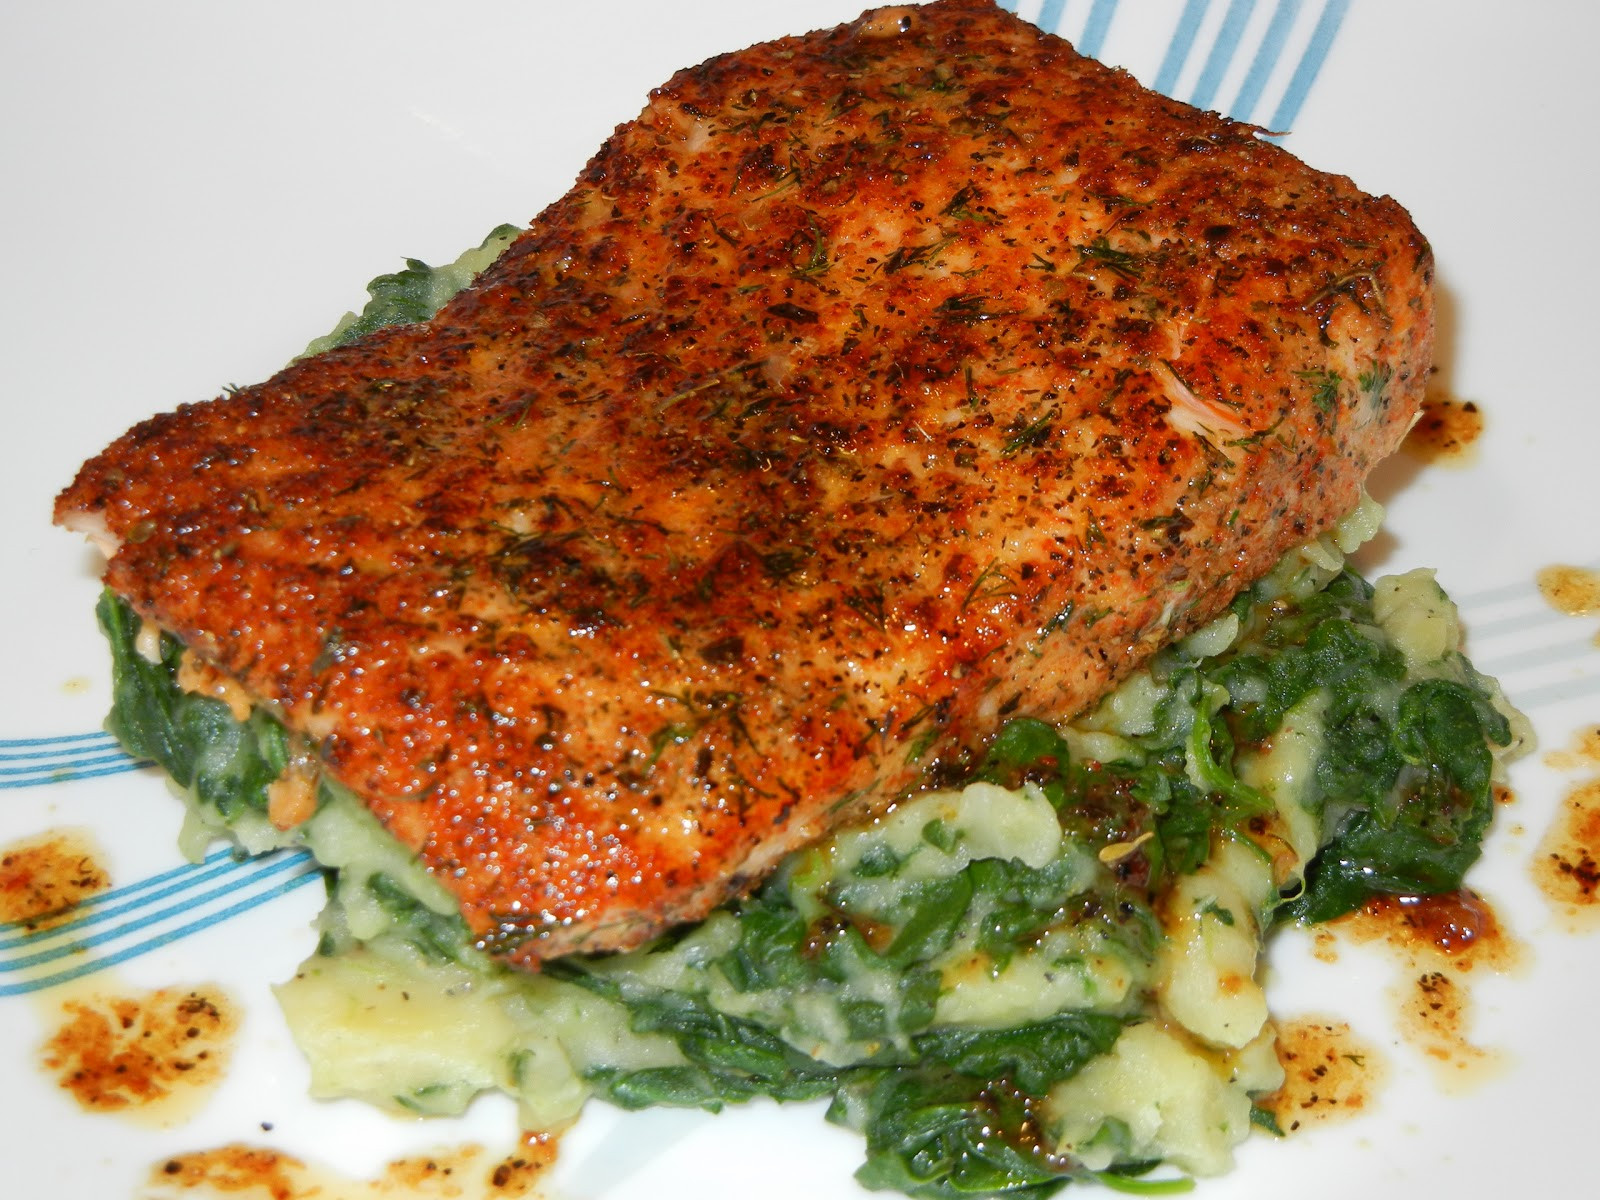 Salmon And Mashed Potatoes
 Simply Delicious Herb Salmon with Spinach Mashed Potato